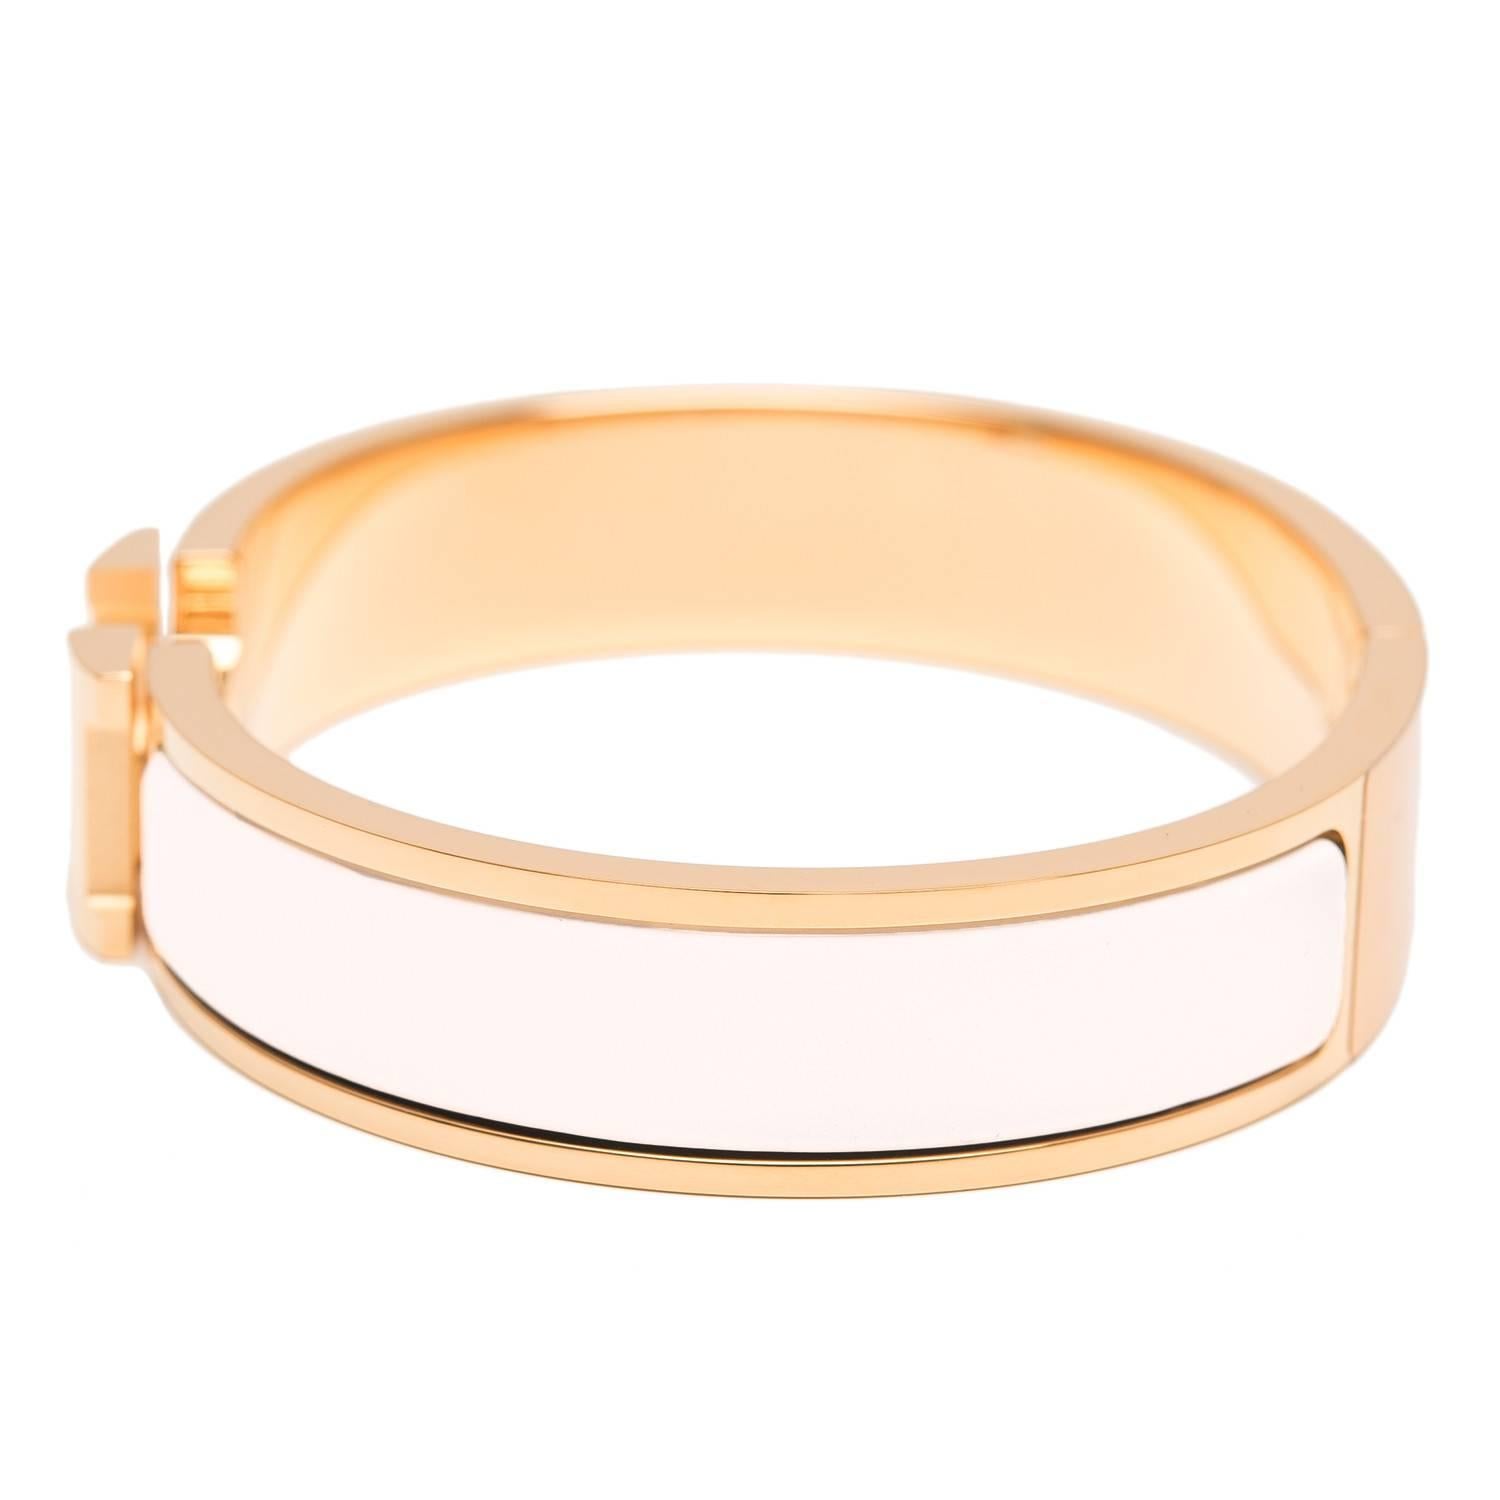 Hermes narrow Clic Clac H bracelet in white enamel closure with gold plated hardware in size PM.

Origin: France

Condition: Pristine; never worn

Accompanied by: Hermes box, Hermes dustbag, carebook

Measurements: Diameter: 2.25";